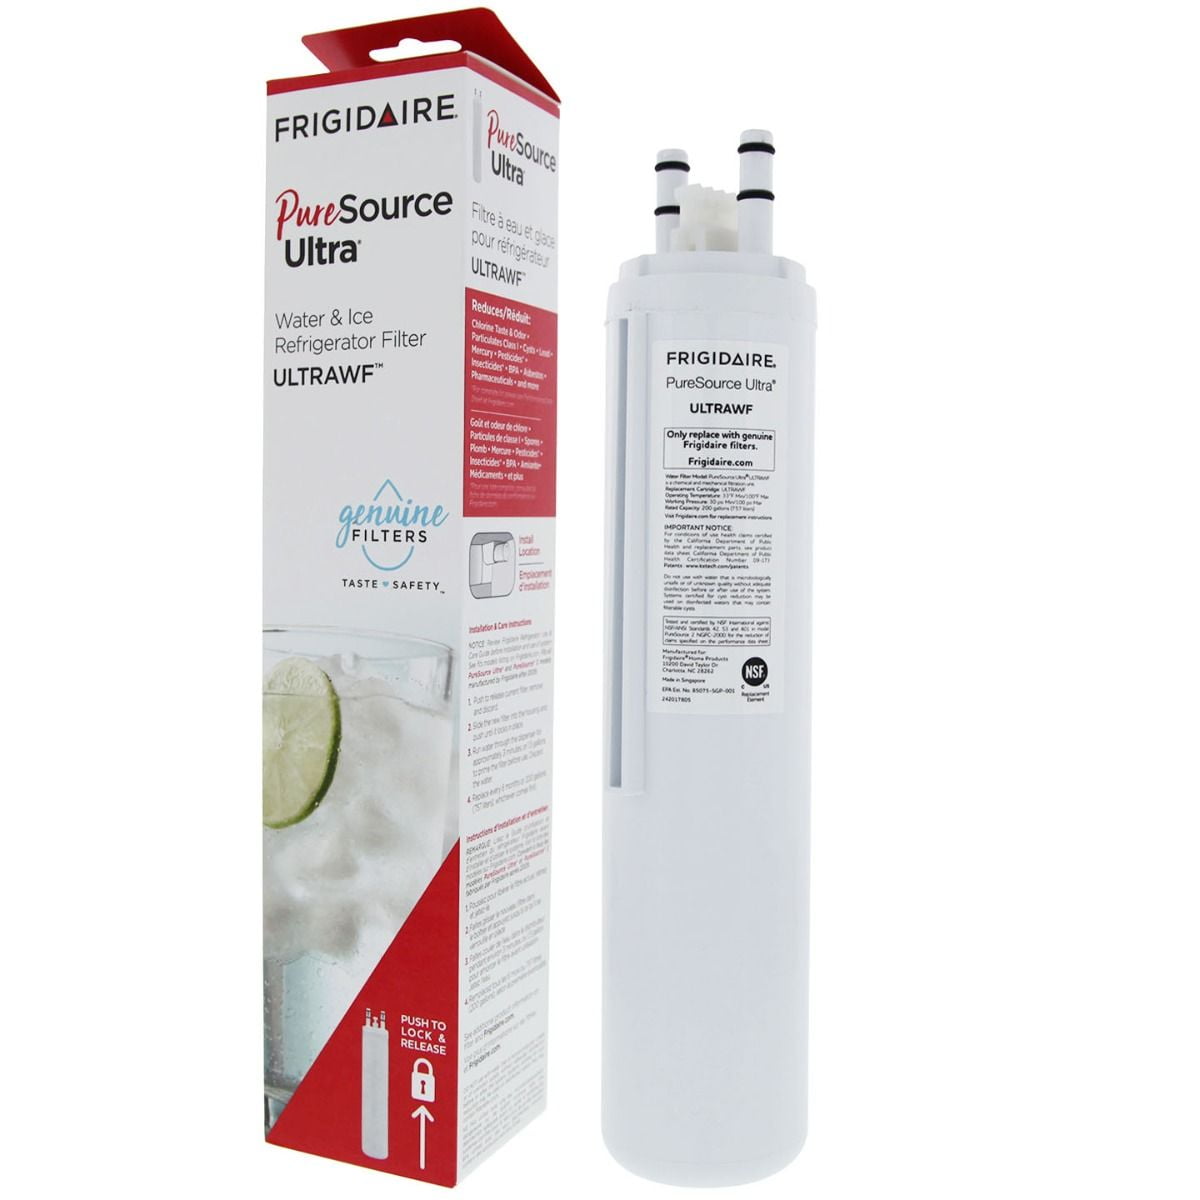 NEW Frigidaire ULTRAWF Filter White for Puresource Ice & Water Filtration 